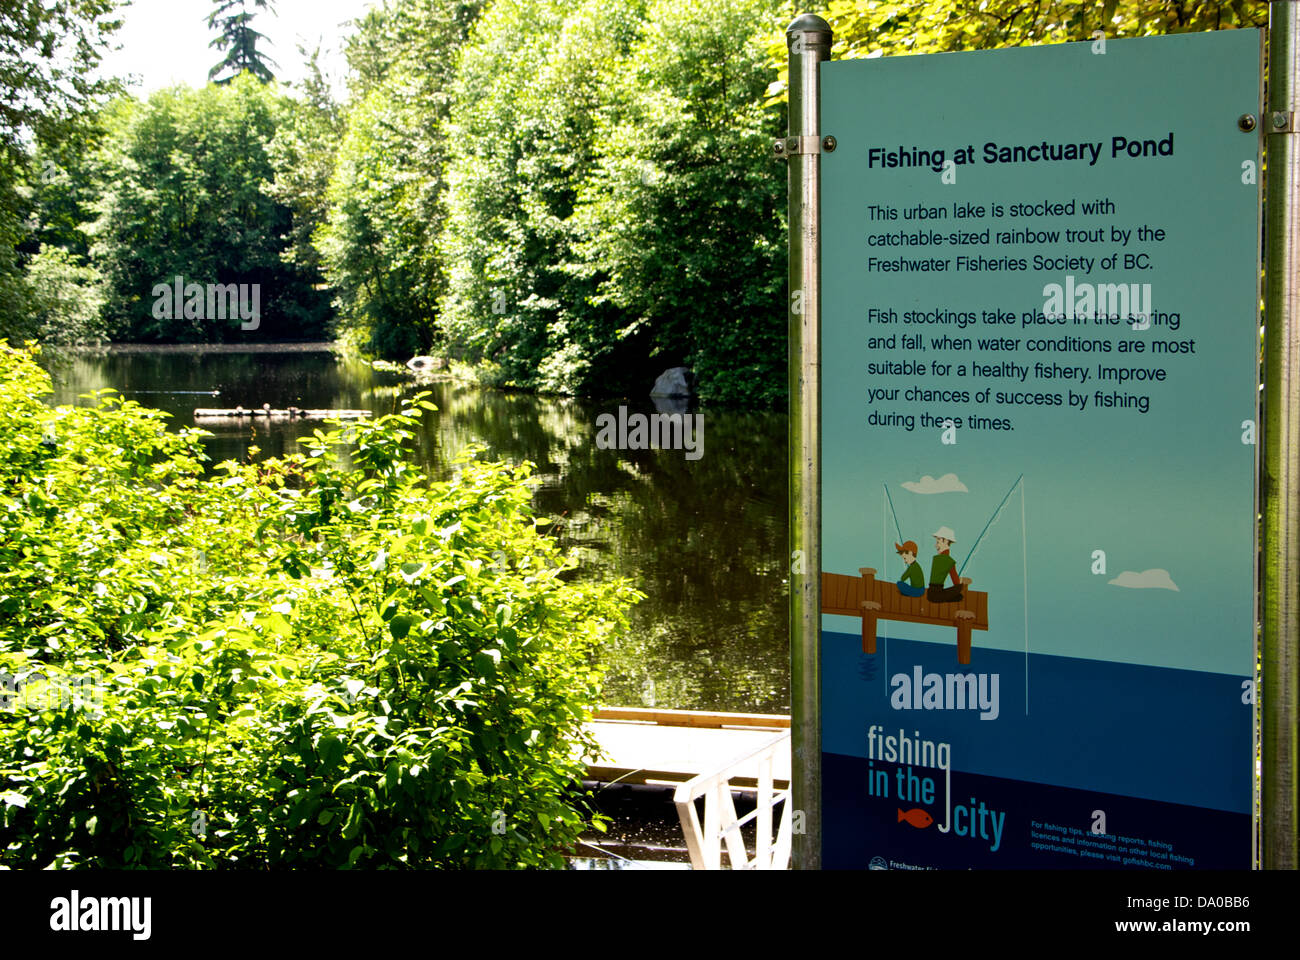 Freshwater Fisheries Society BC Fishing in City sign Sanctuary Pond Hastings Park Vancouver Stock Photo